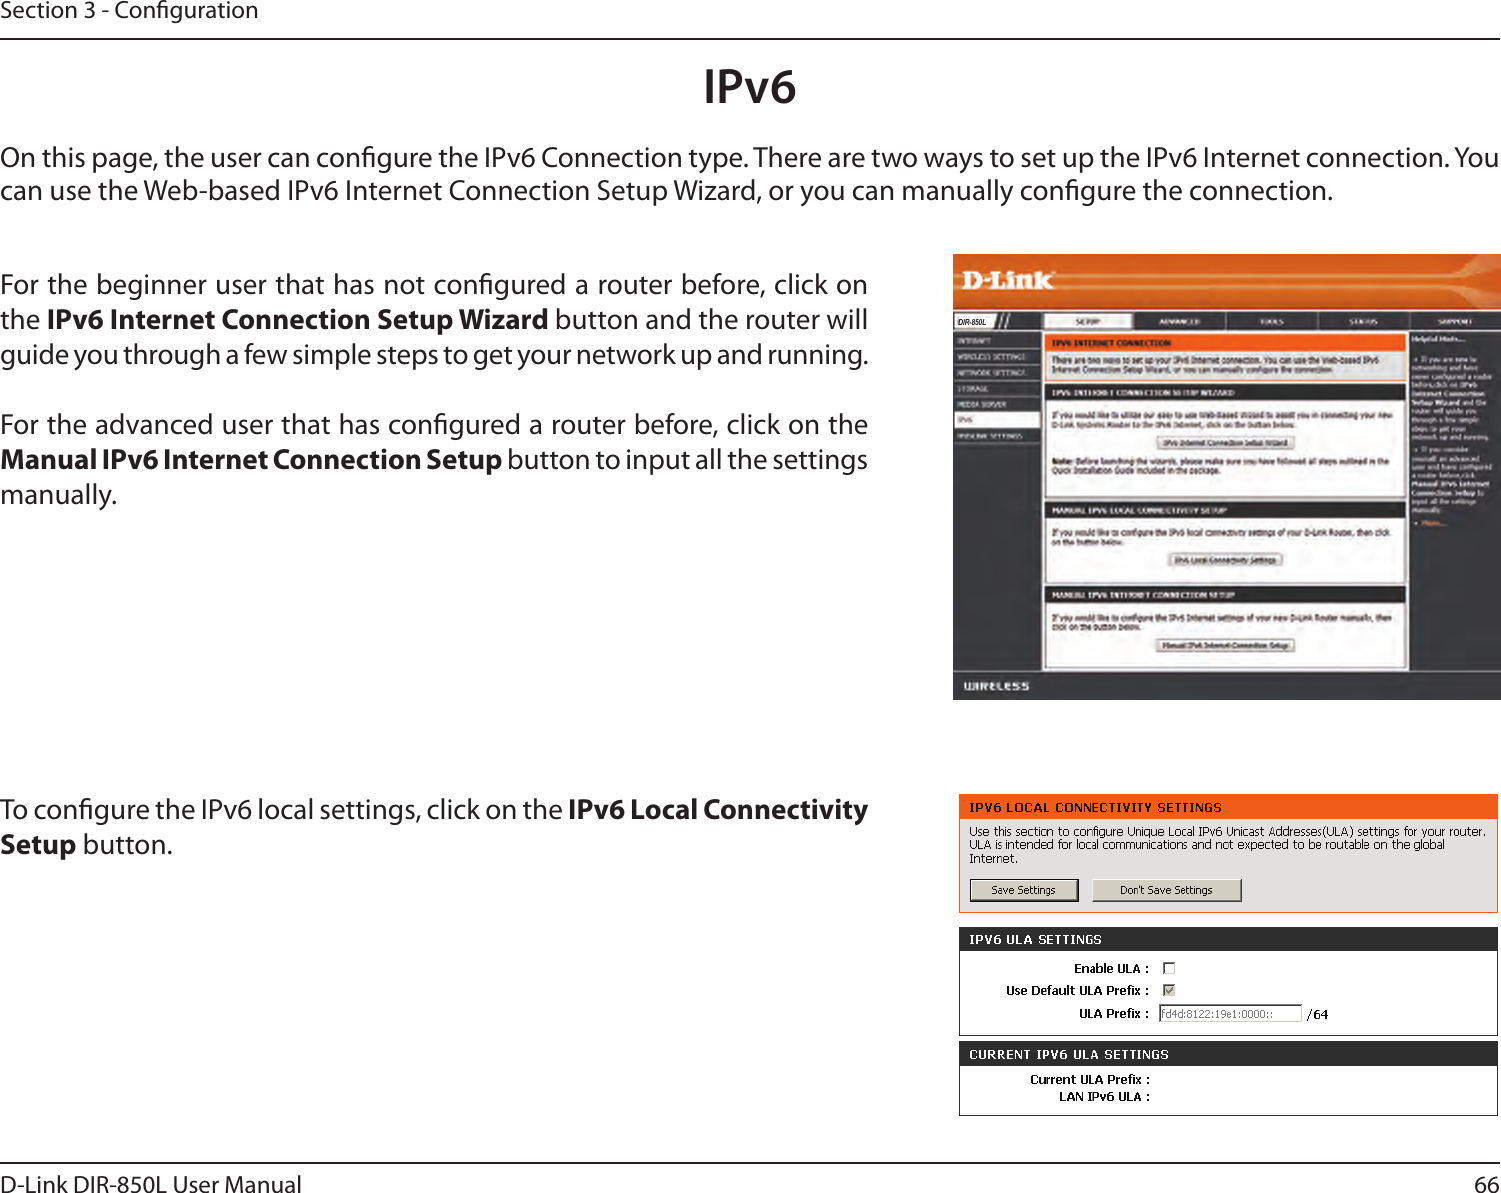 66D-Link DIR-850L User ManualSection 3 - CongurationIPv6On this page, the user can congure the IPv6 Connection type. There are two ways to set up the IPv6 Internet connection. You can use the Web-based IPv6 Internet Connection Setup Wizard, or you can manually congure the connection.For the beginner user that has not congured a router before, click on the IPv6 Internet Connection Setup Wizard button and the router will guide you through a few simple steps to get your network up and running.For the advanced user that has congured a router before, click on the Manual IPv6 Internet Connection Setup button to input all the settings manually.To congure the IPv6 local settings, click on the IPv6 Local Connectivity Setup button.DIR-850L